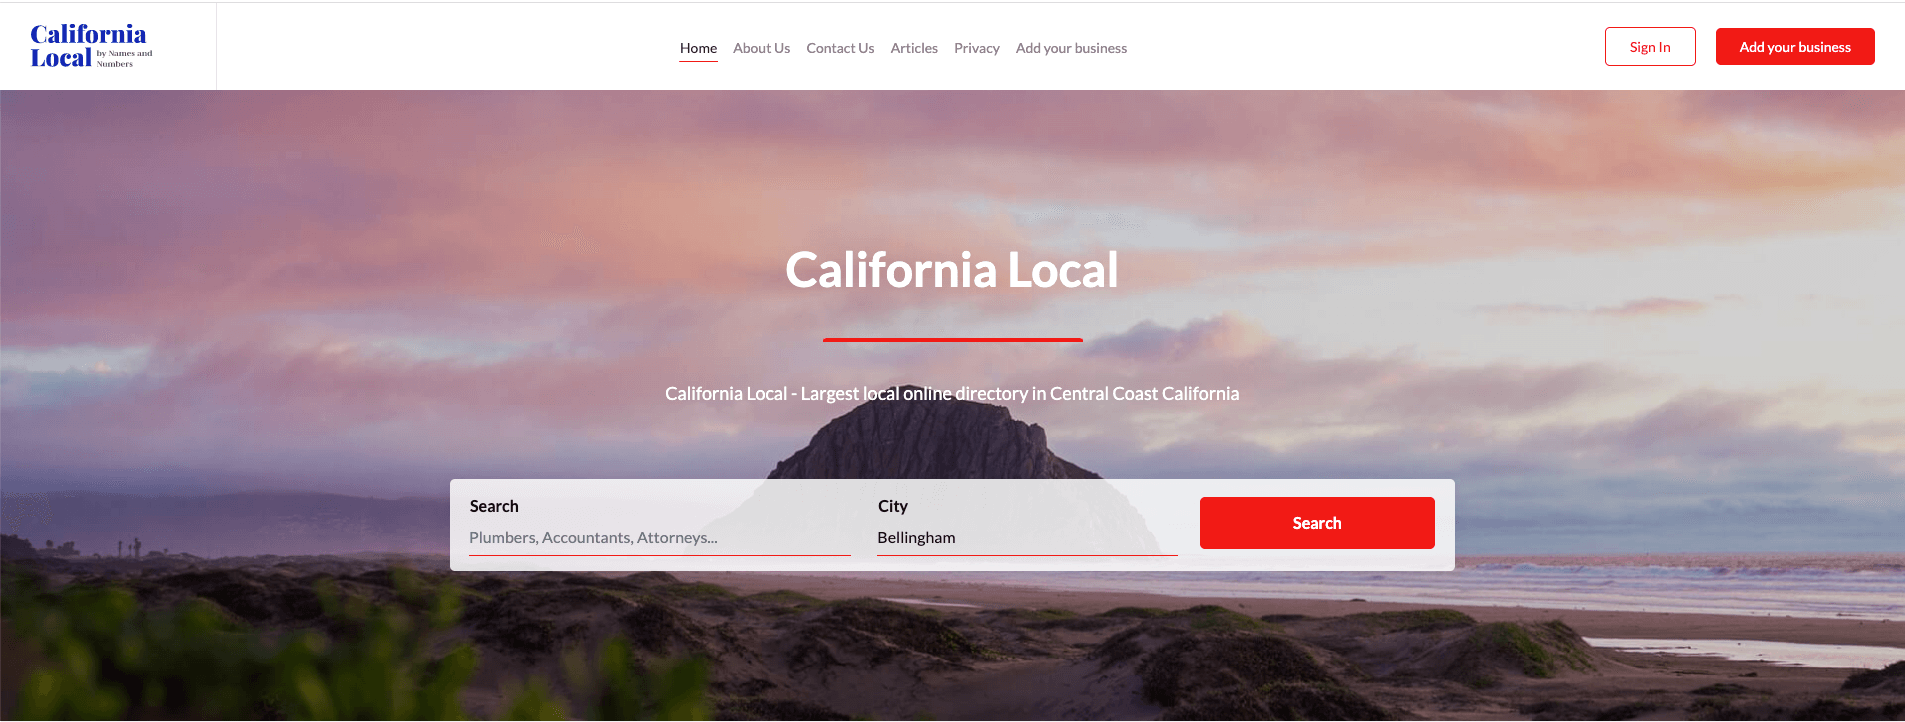 California Local home page